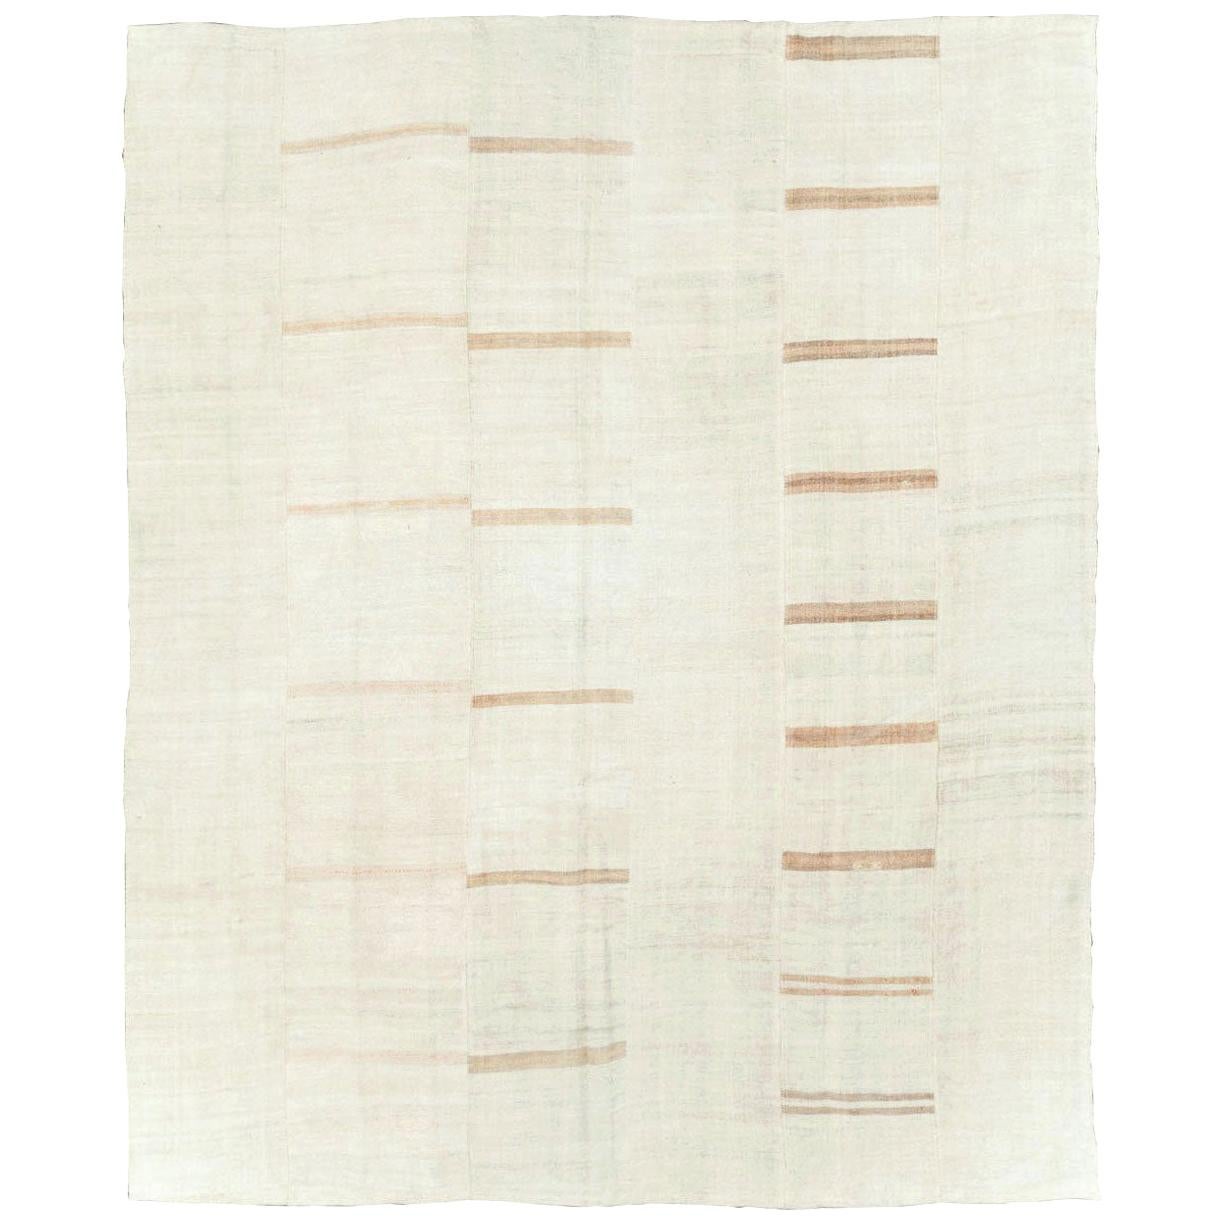 Mid-20th Century Turkish Flat-Weave Kilim Large Room Size Carpet in Cream White For Sale